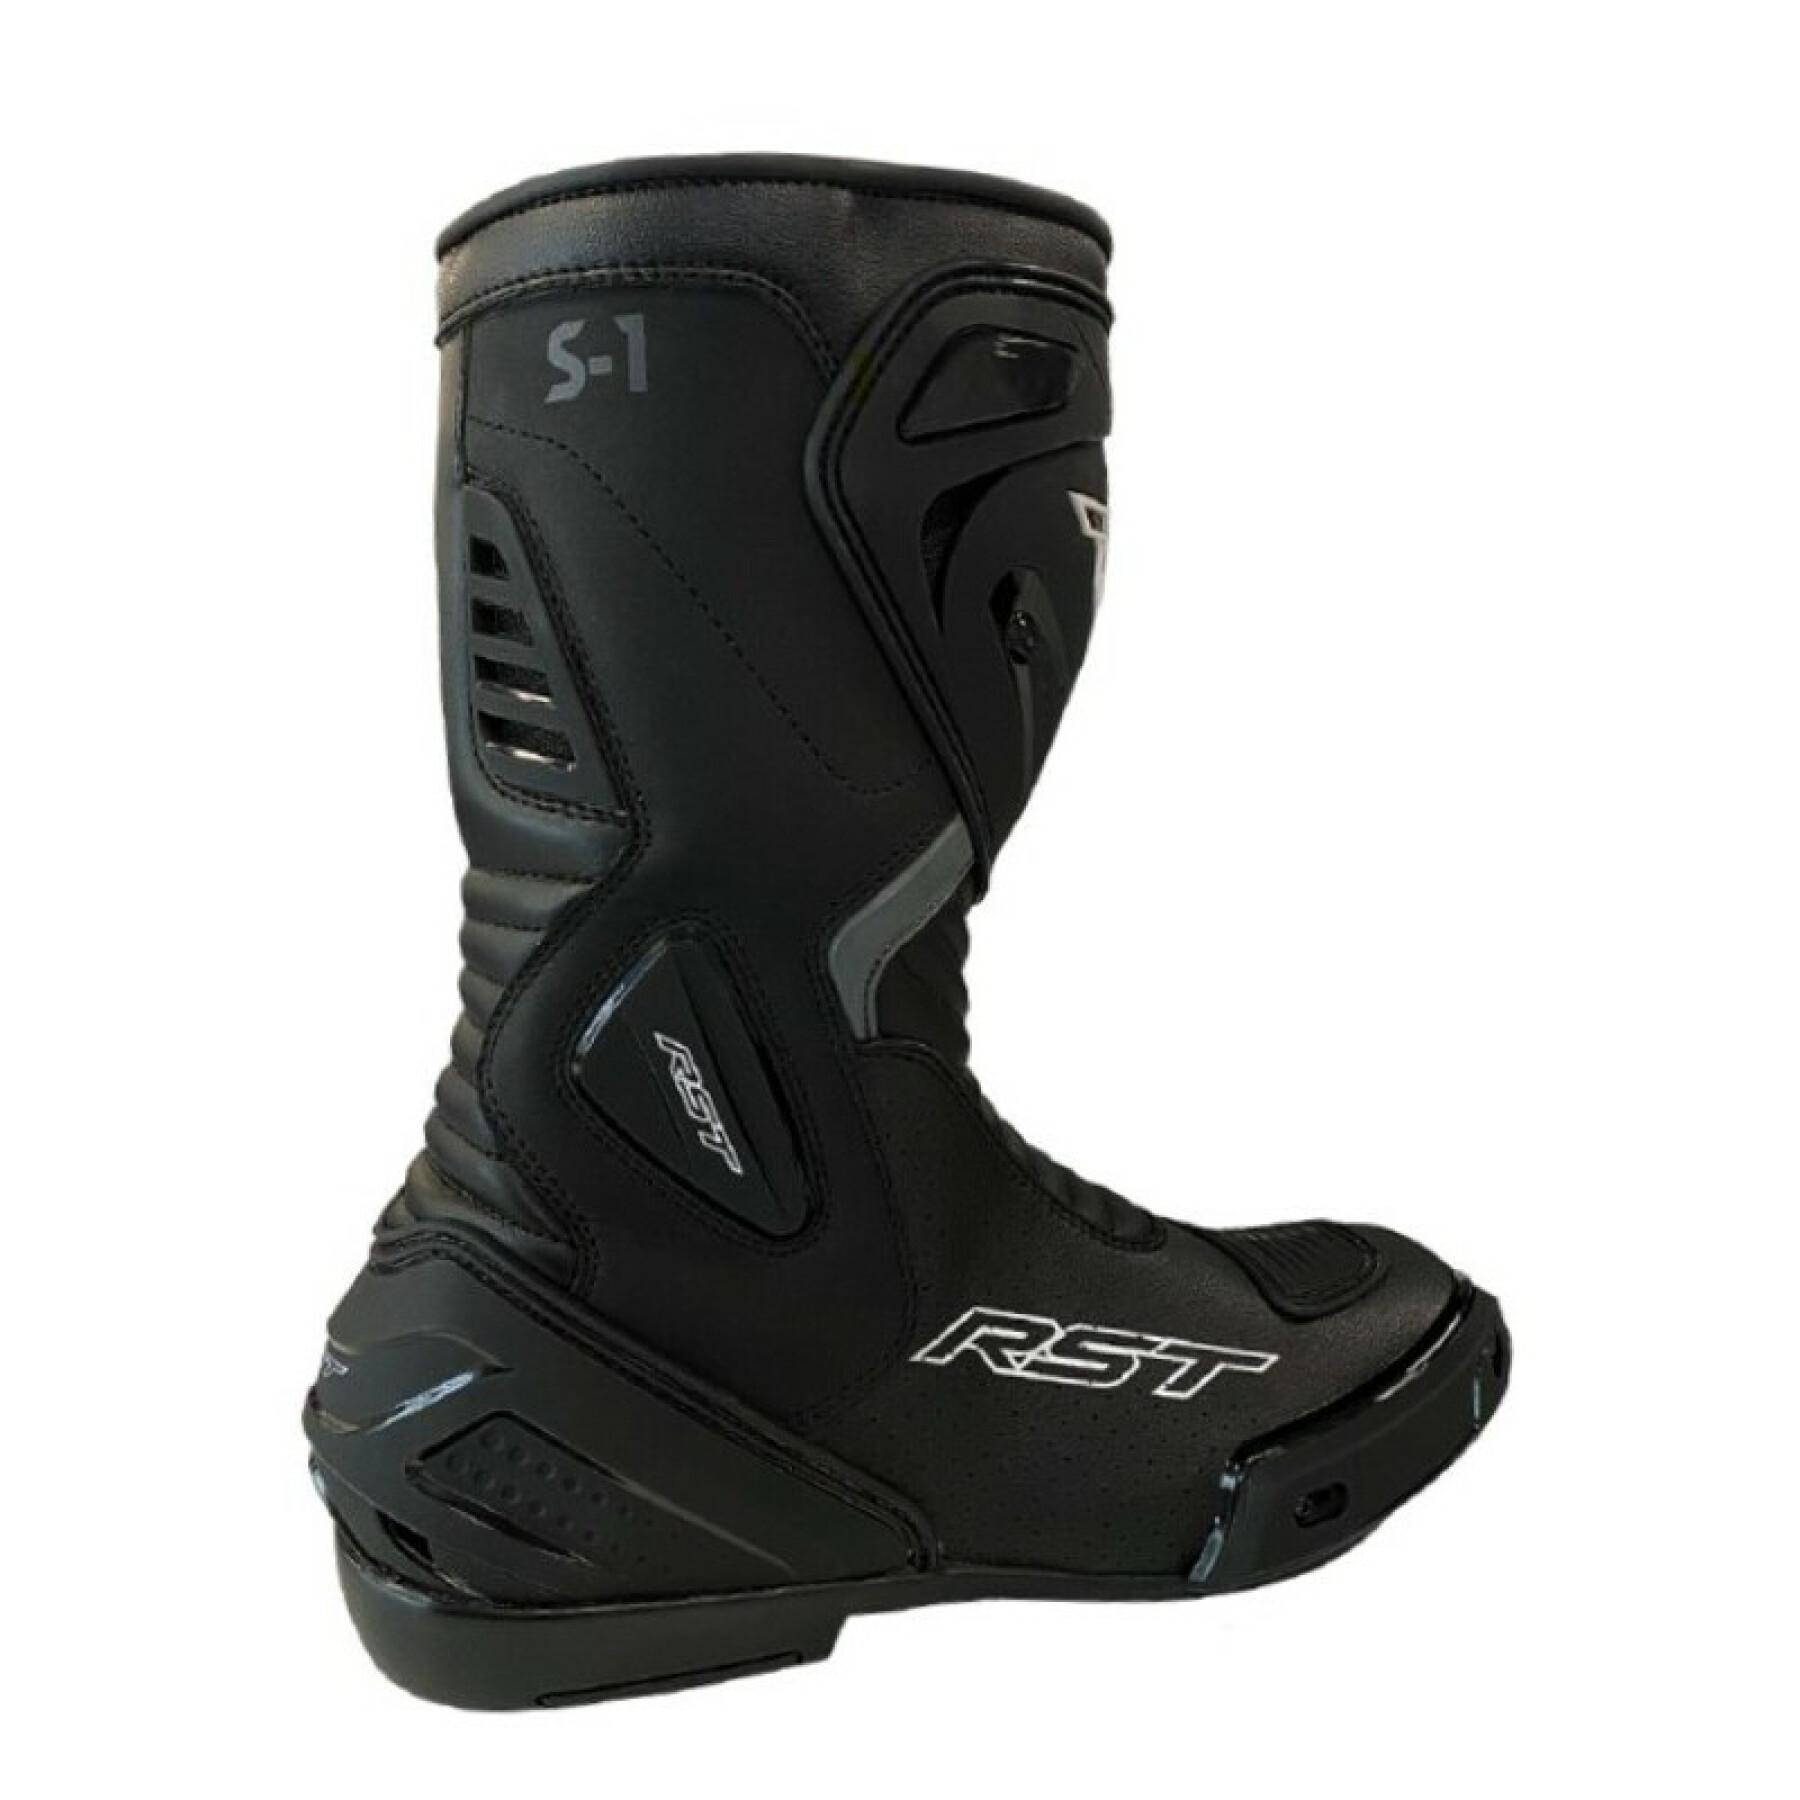 Waterproof motorcycle boots RST S1